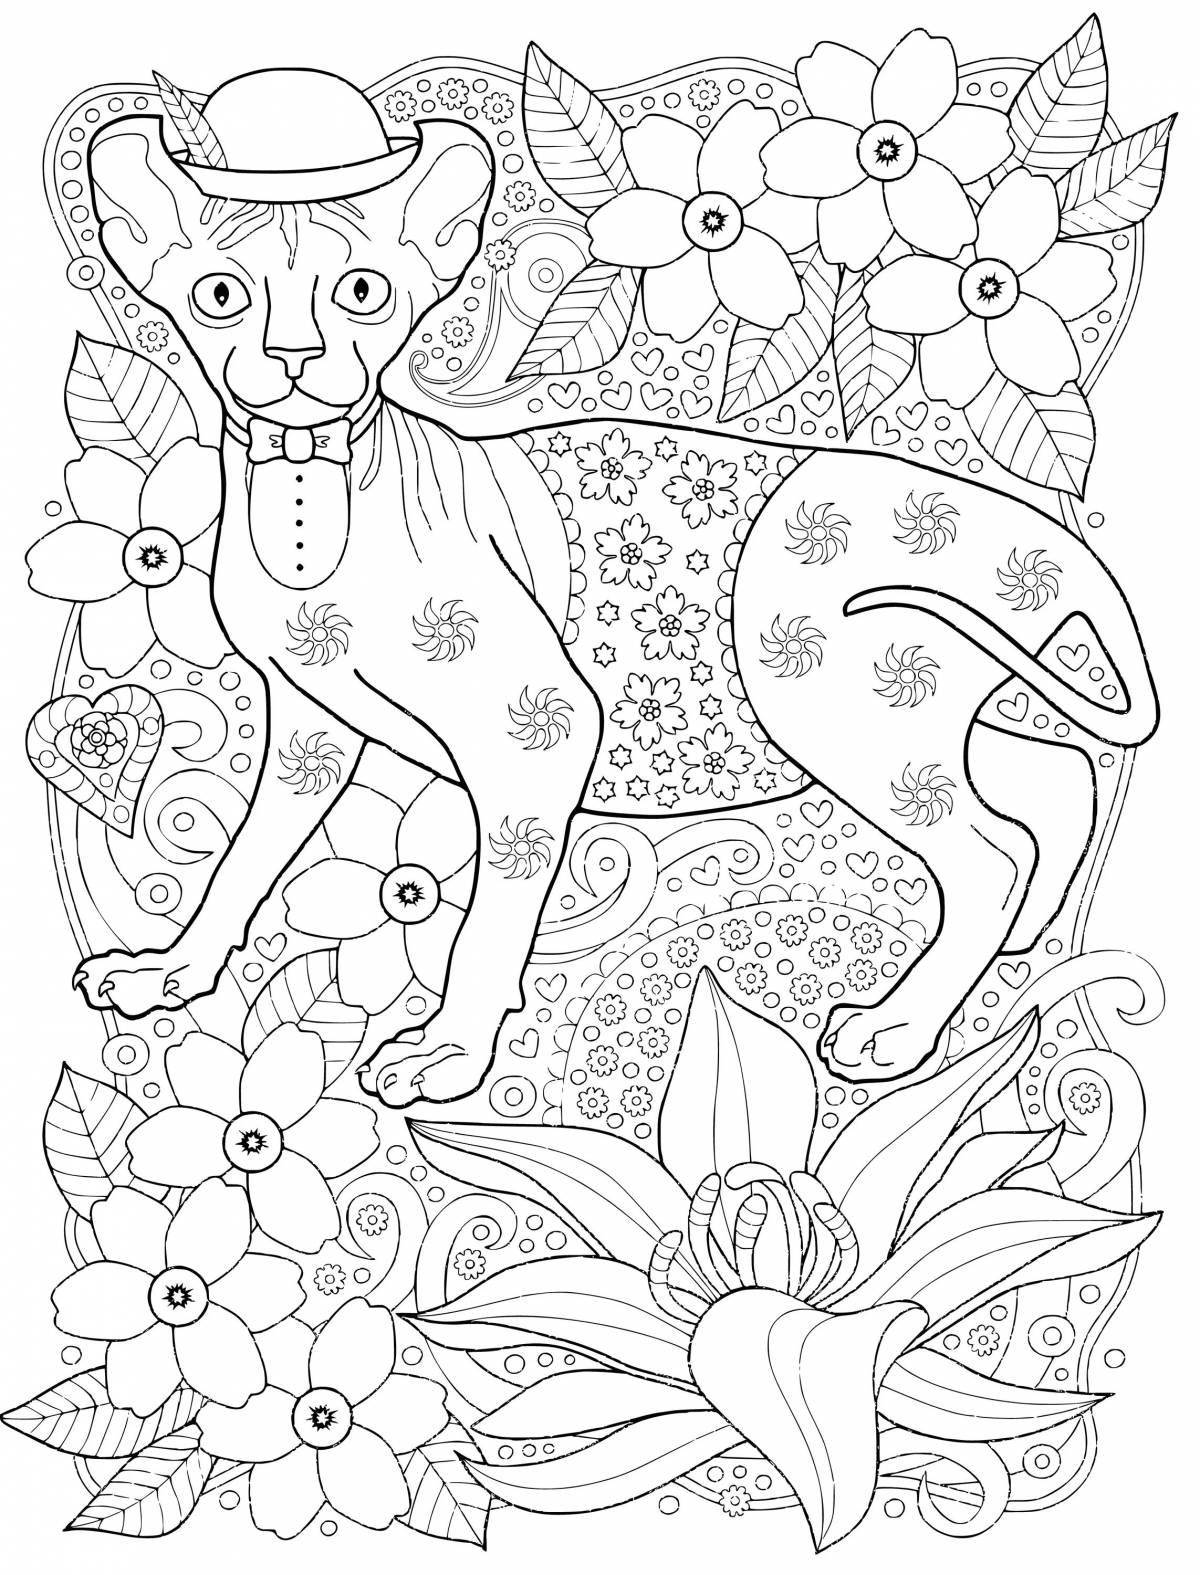 Coloring page playful sphinx cat